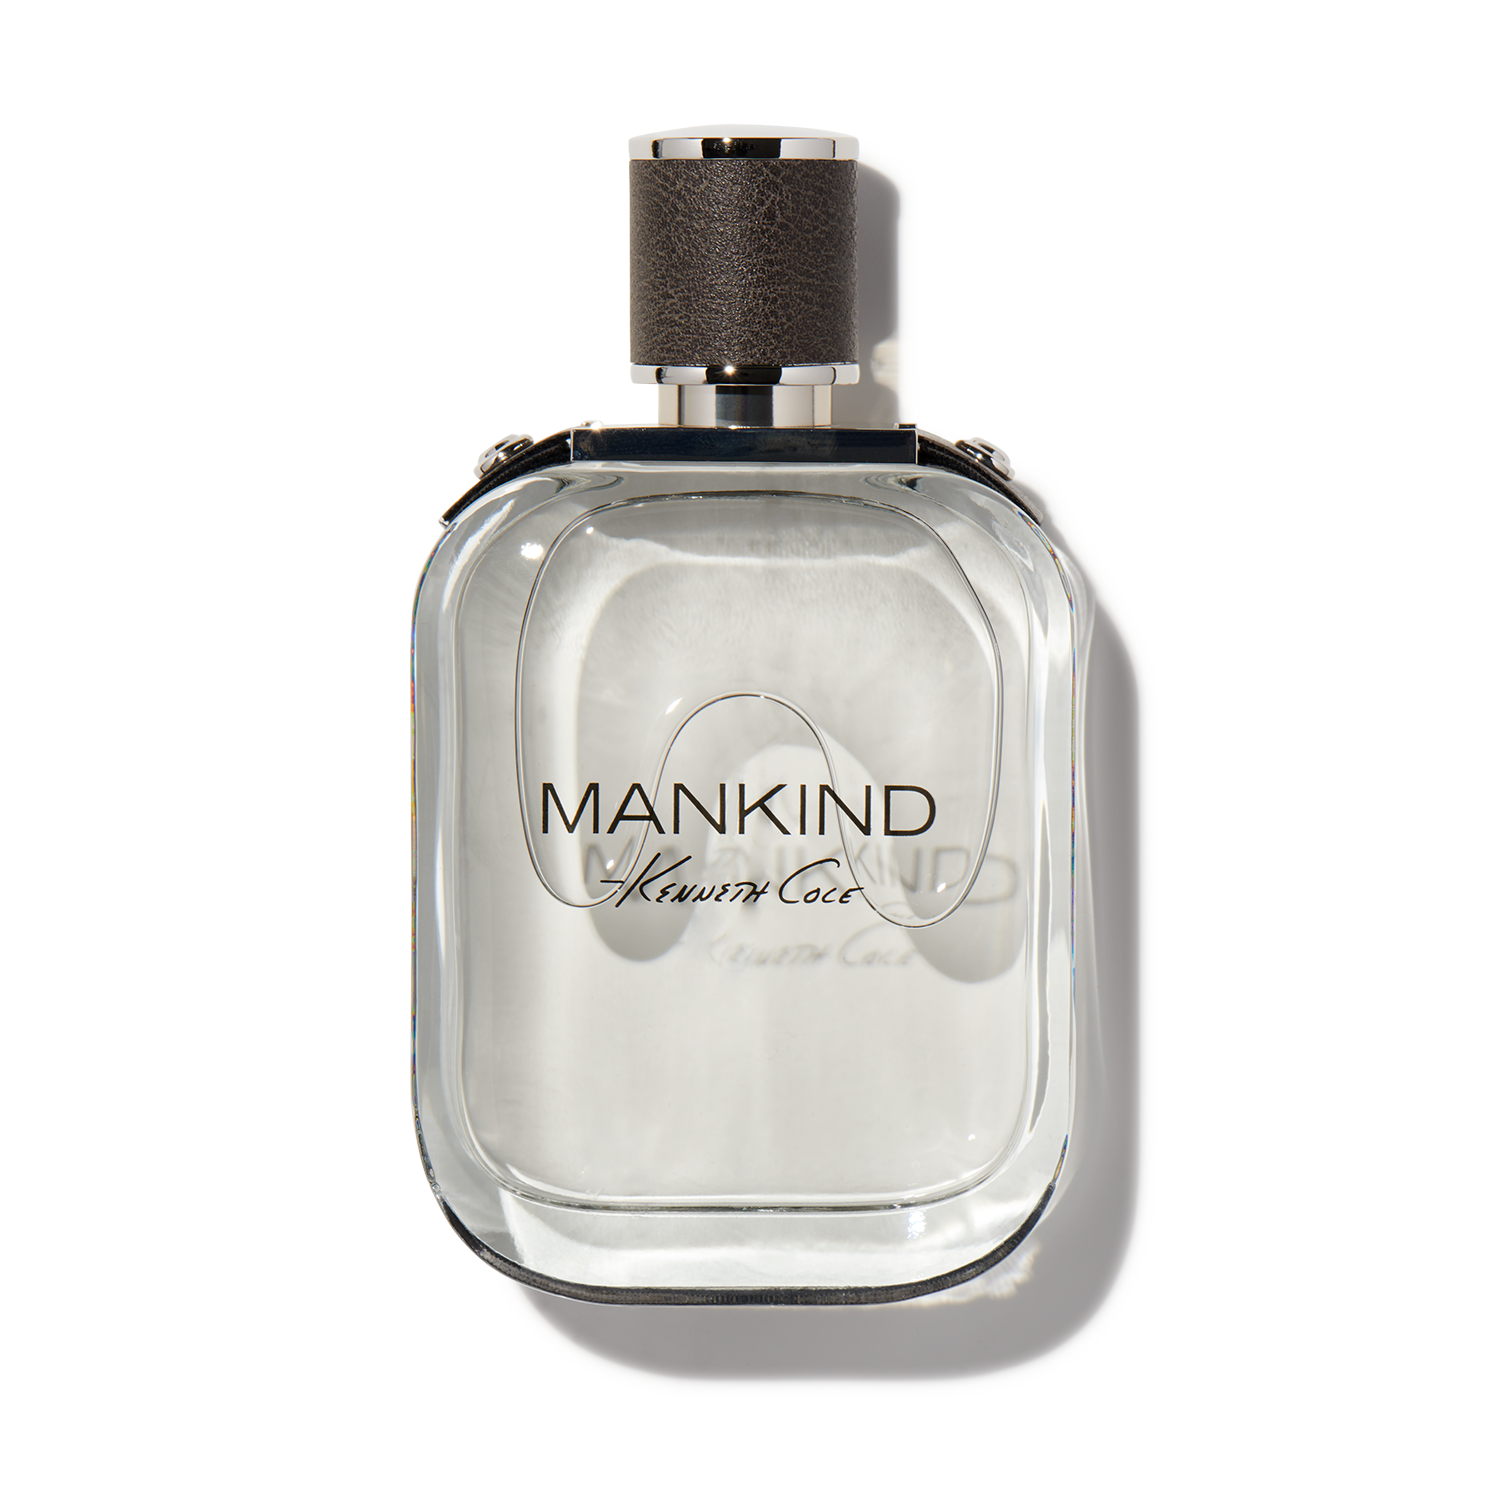 Mankind by Kenneth Cole $16.95/month | Scentbird